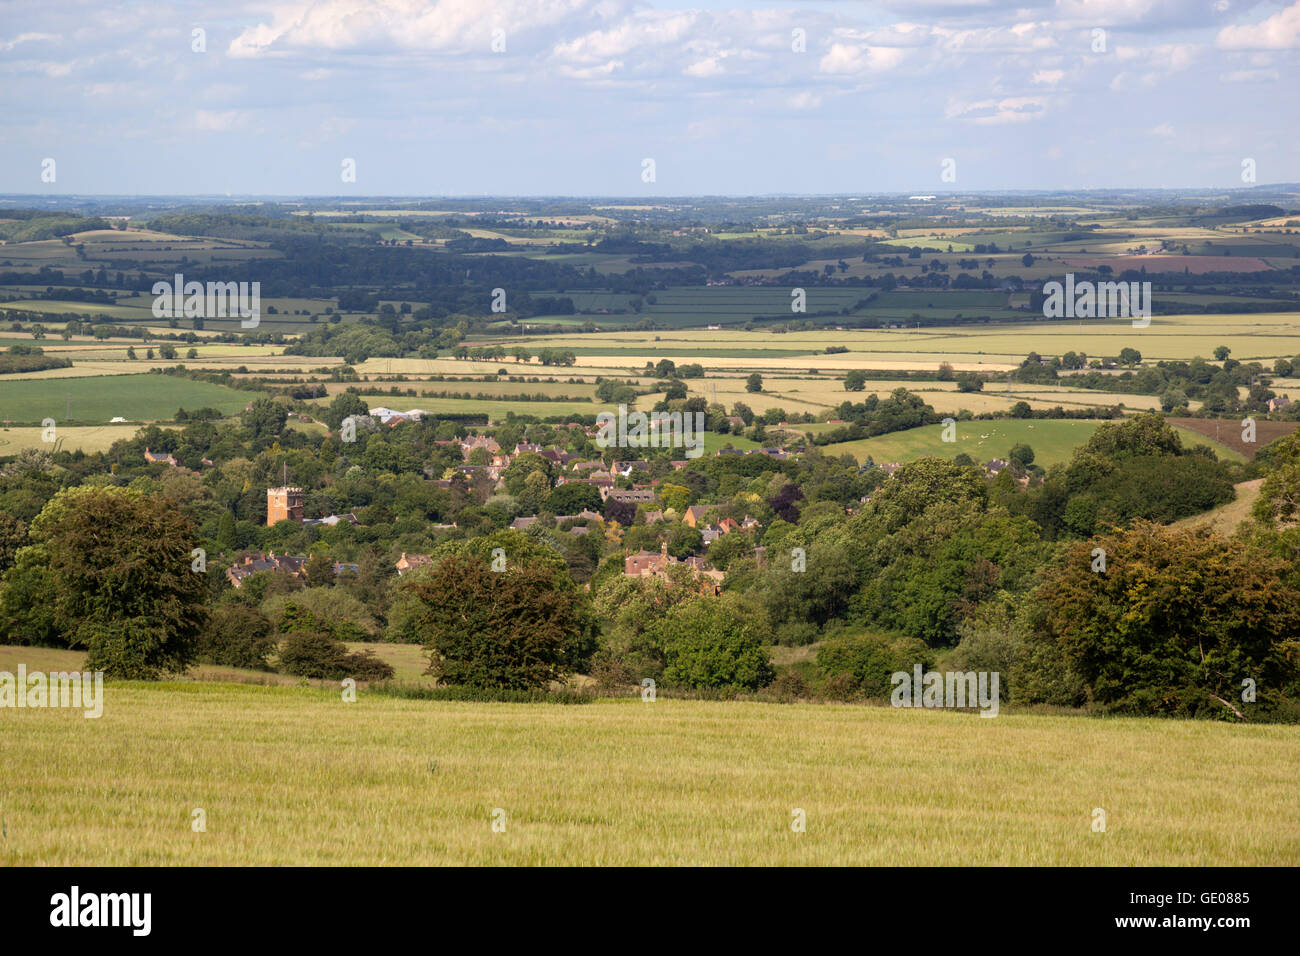 View over village of Ilmington and Warwickshire countryside, Ilmington, Cotswolds, Warwickshire, England, United Kingdom, Europe Stock Photo